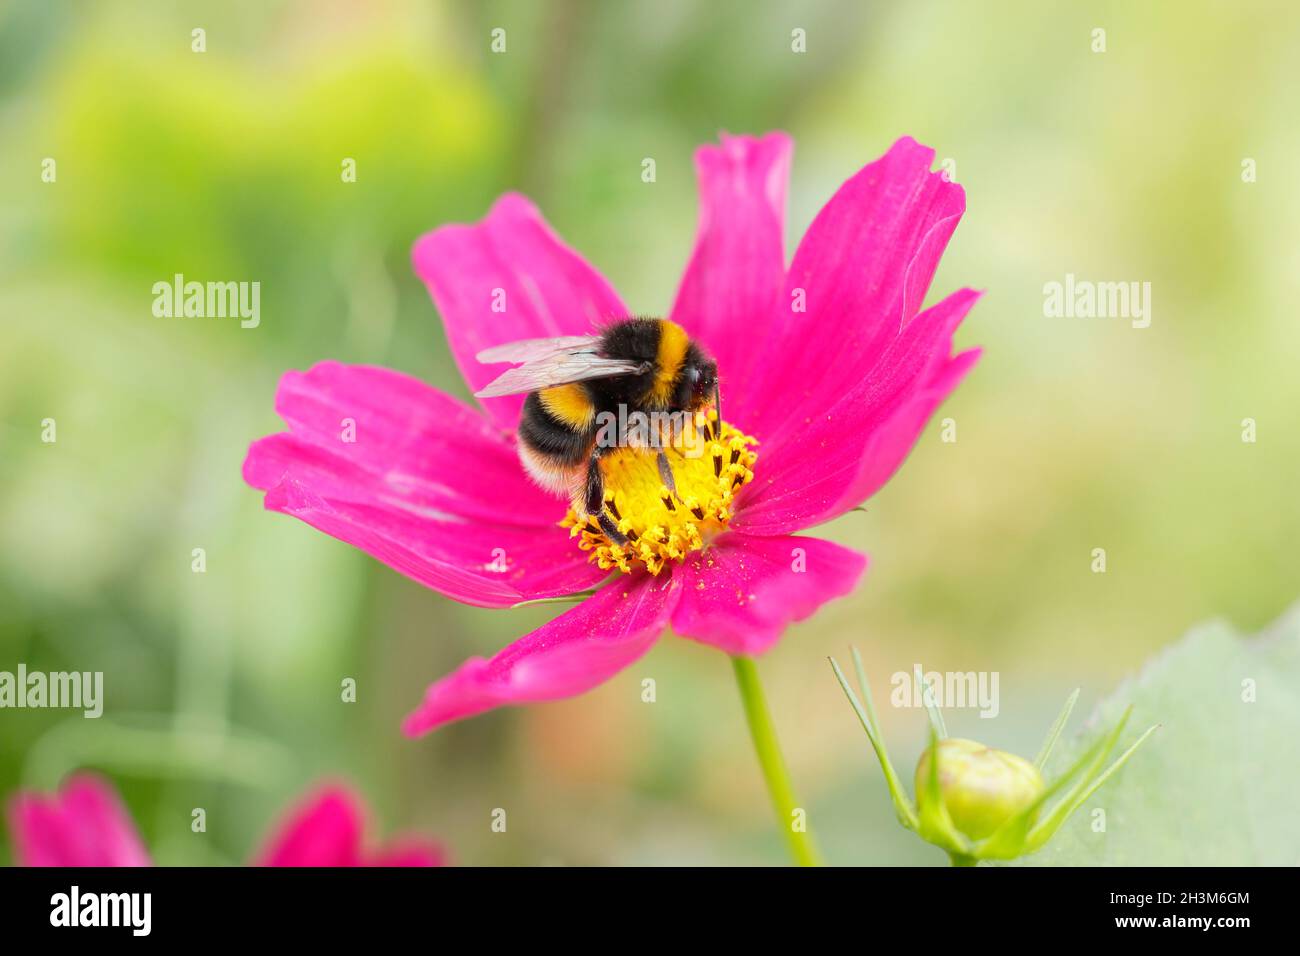 Bumble bee collecting collecting nectar and pollen on a cosmos flower. Bombos on Cosmos bipinnatus 'Candy stripe', Stock Photo